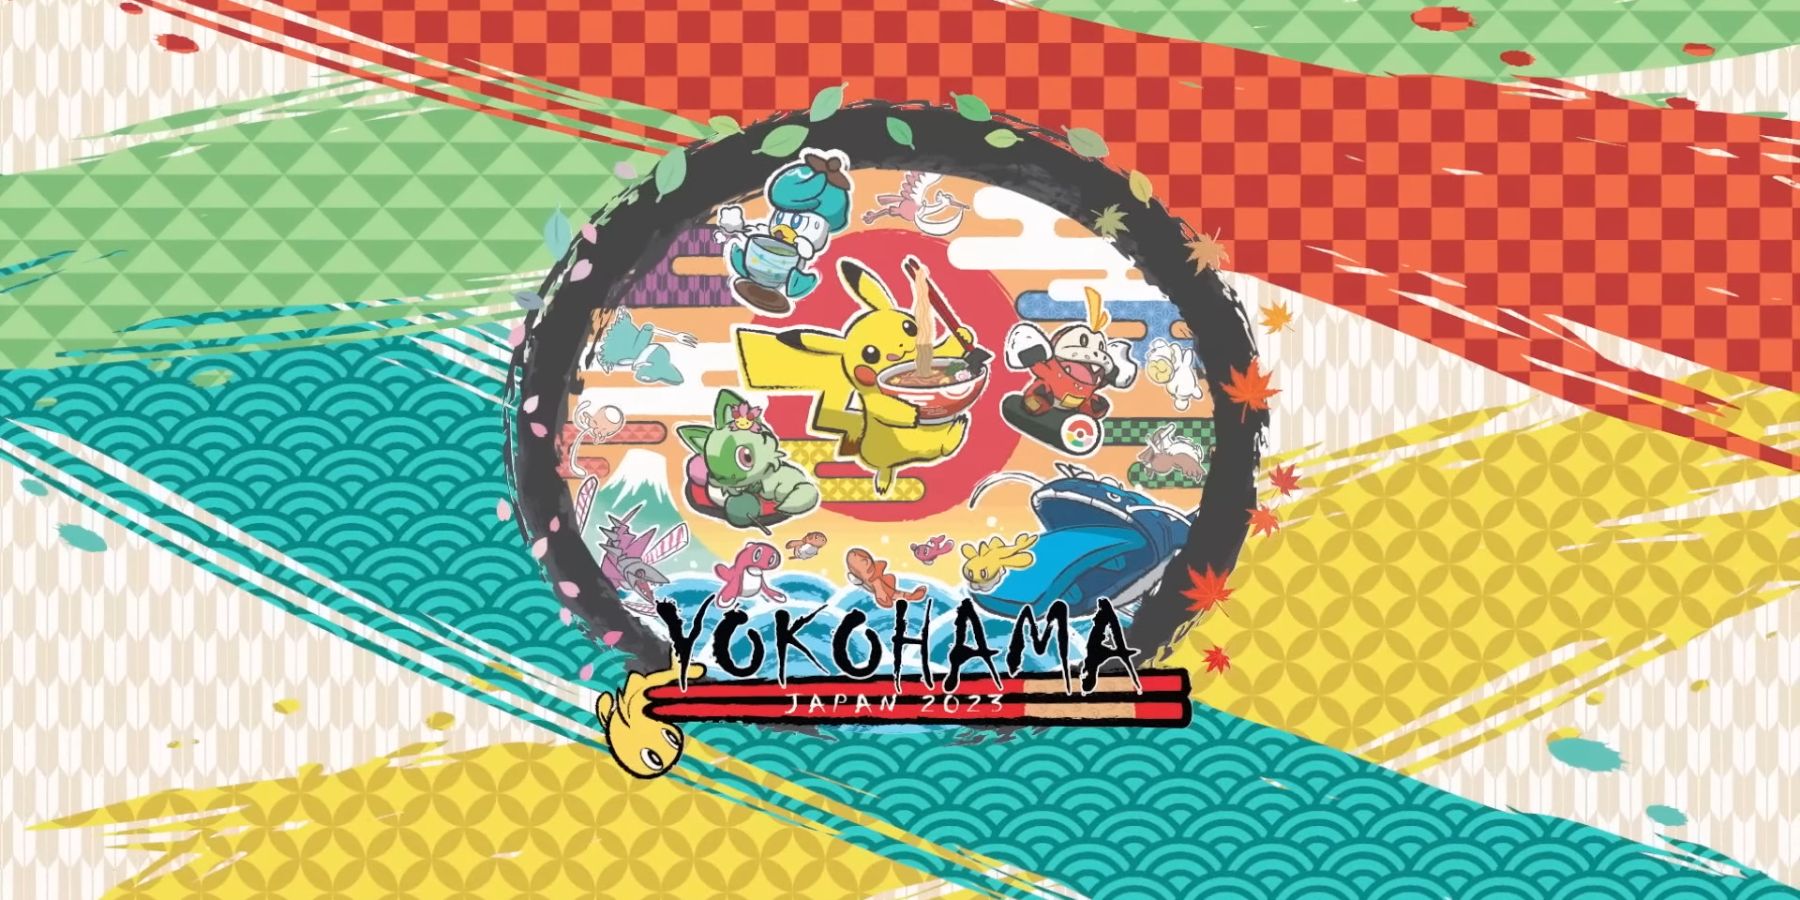 The logo for the Pokémon TCG's 2023 World Championships, showing Pikachu and the Gen 9 starters above the name of the tournament's location - Yokohama, Japan.